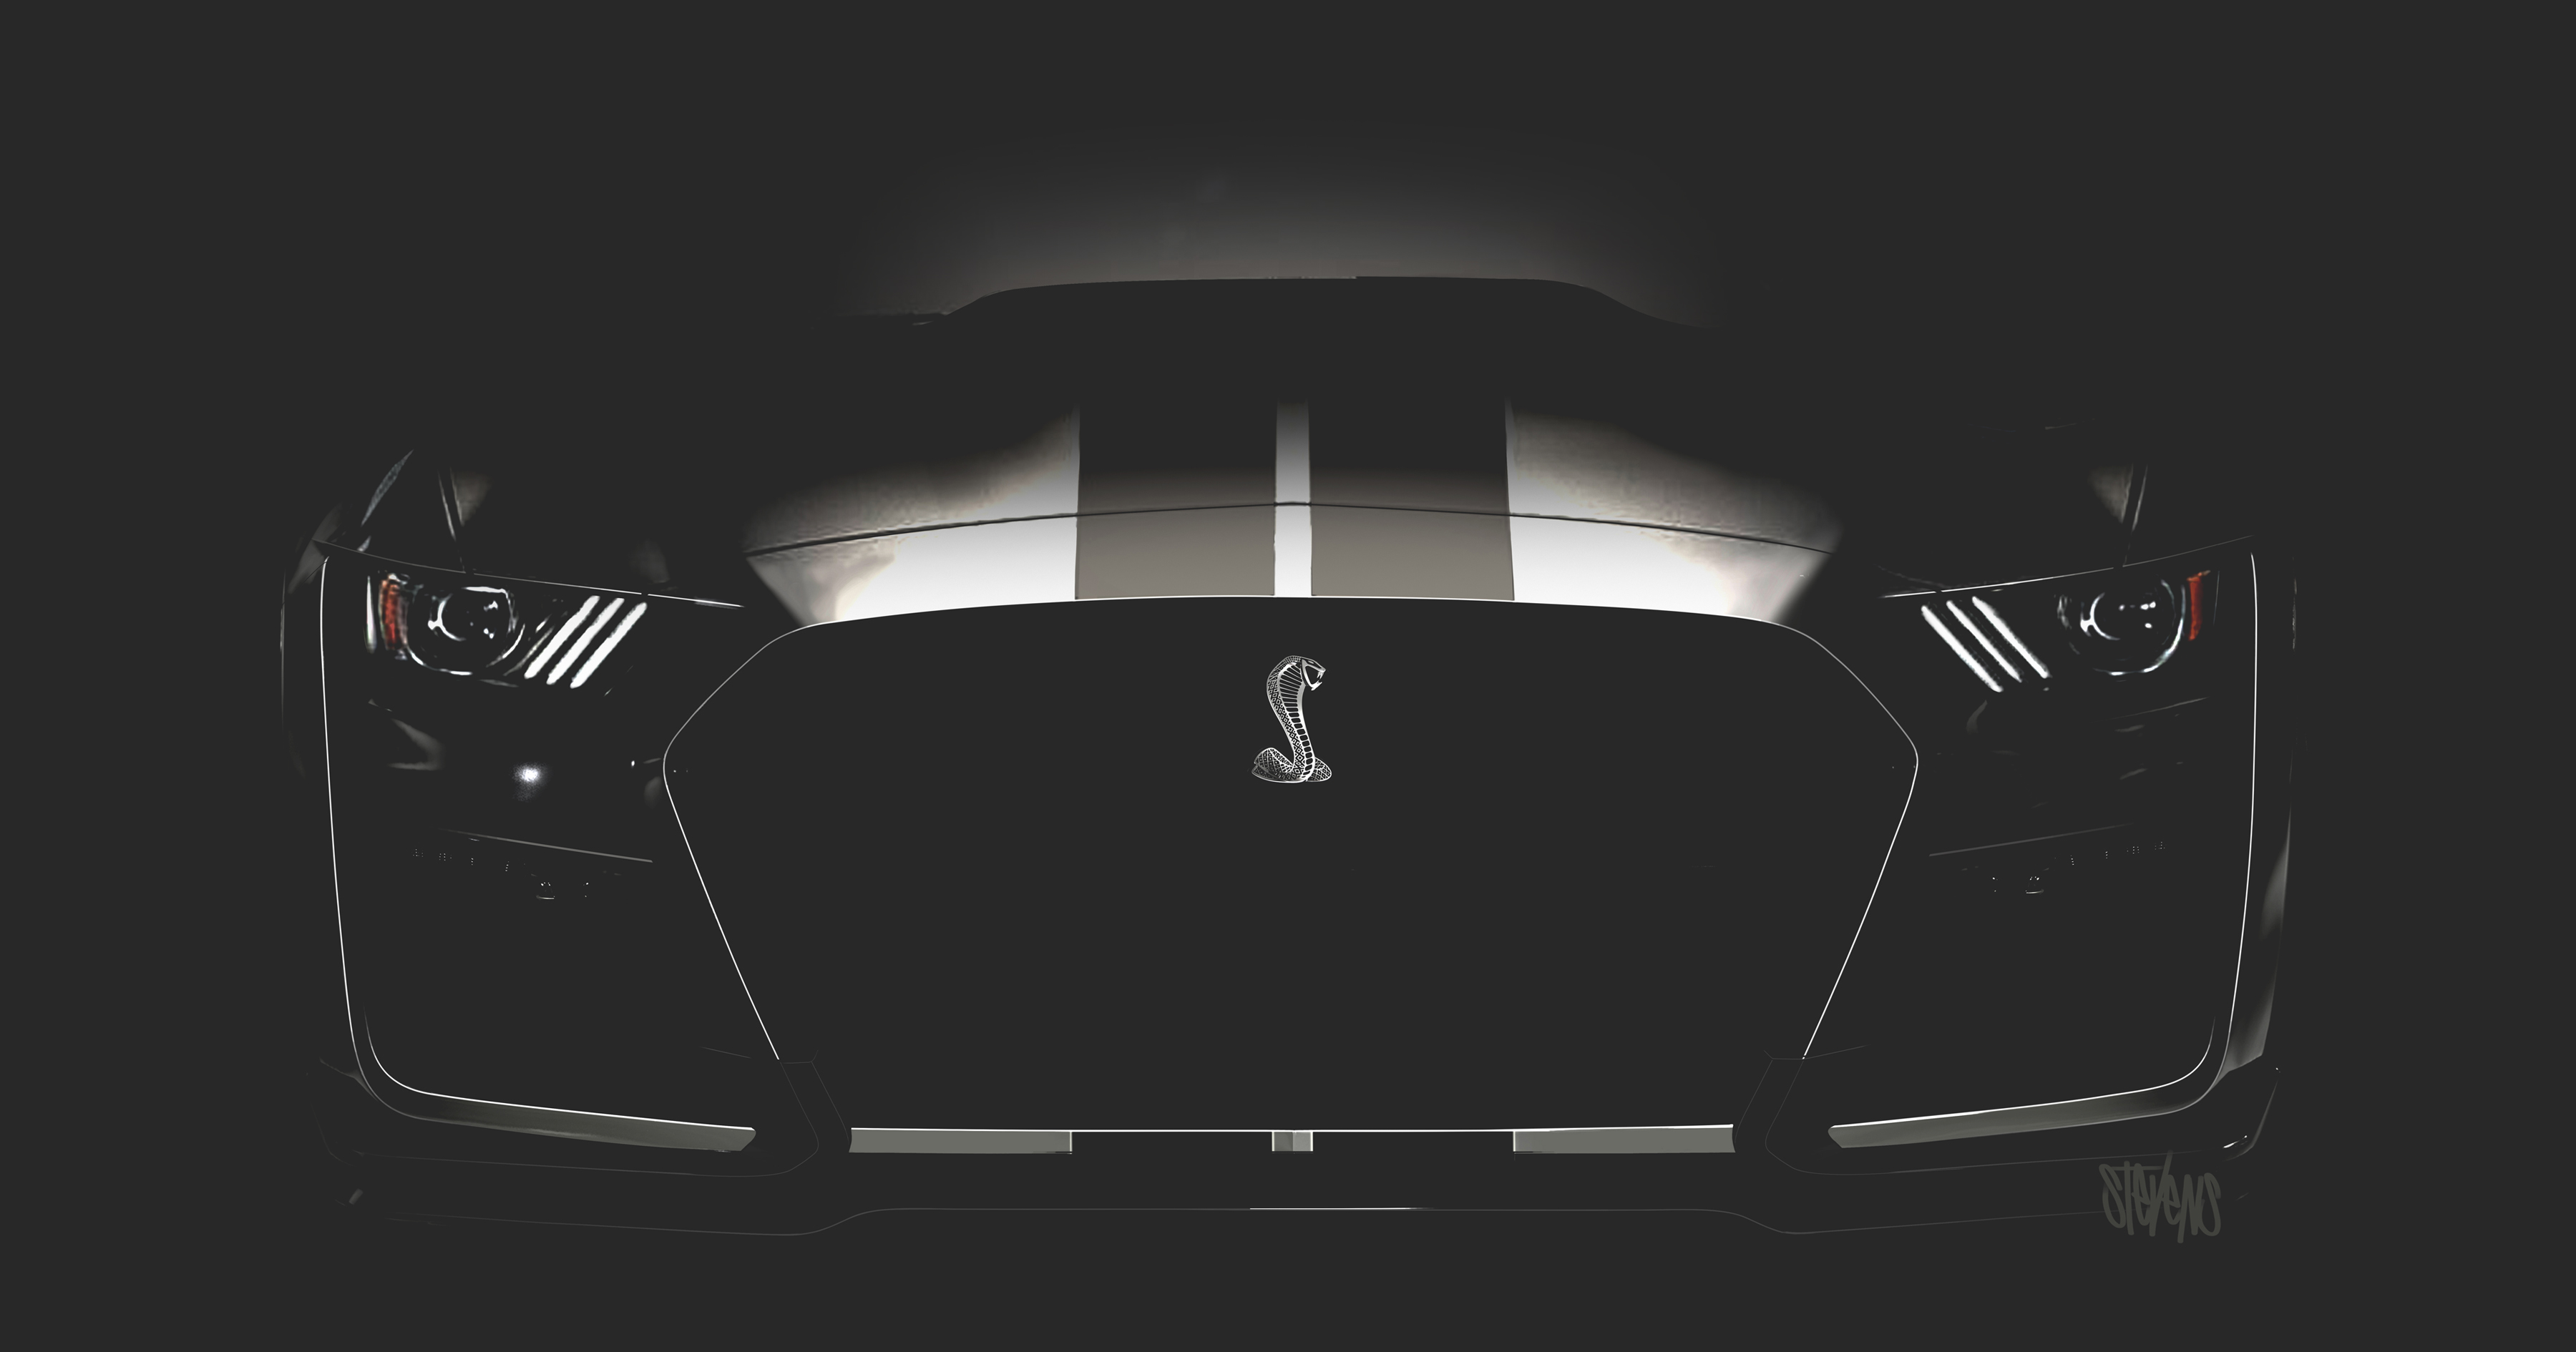 Everything we know about the 2020 Ford Mustang Shelby GT500